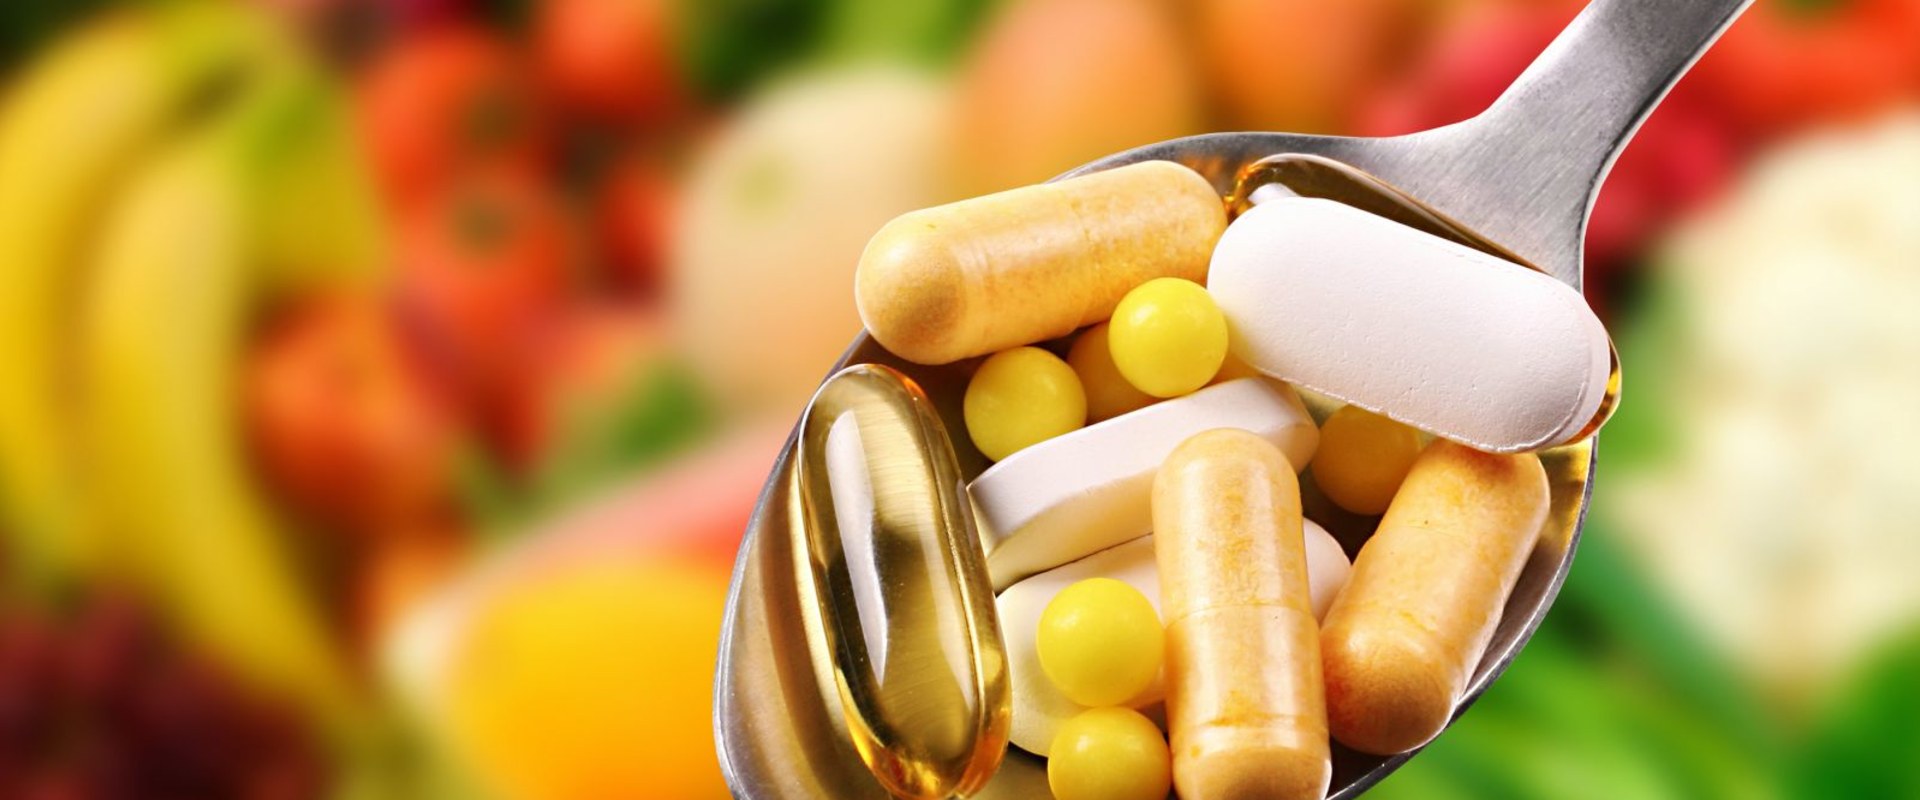 How Many Nutritional Supplements Are There? An Expert's Guide